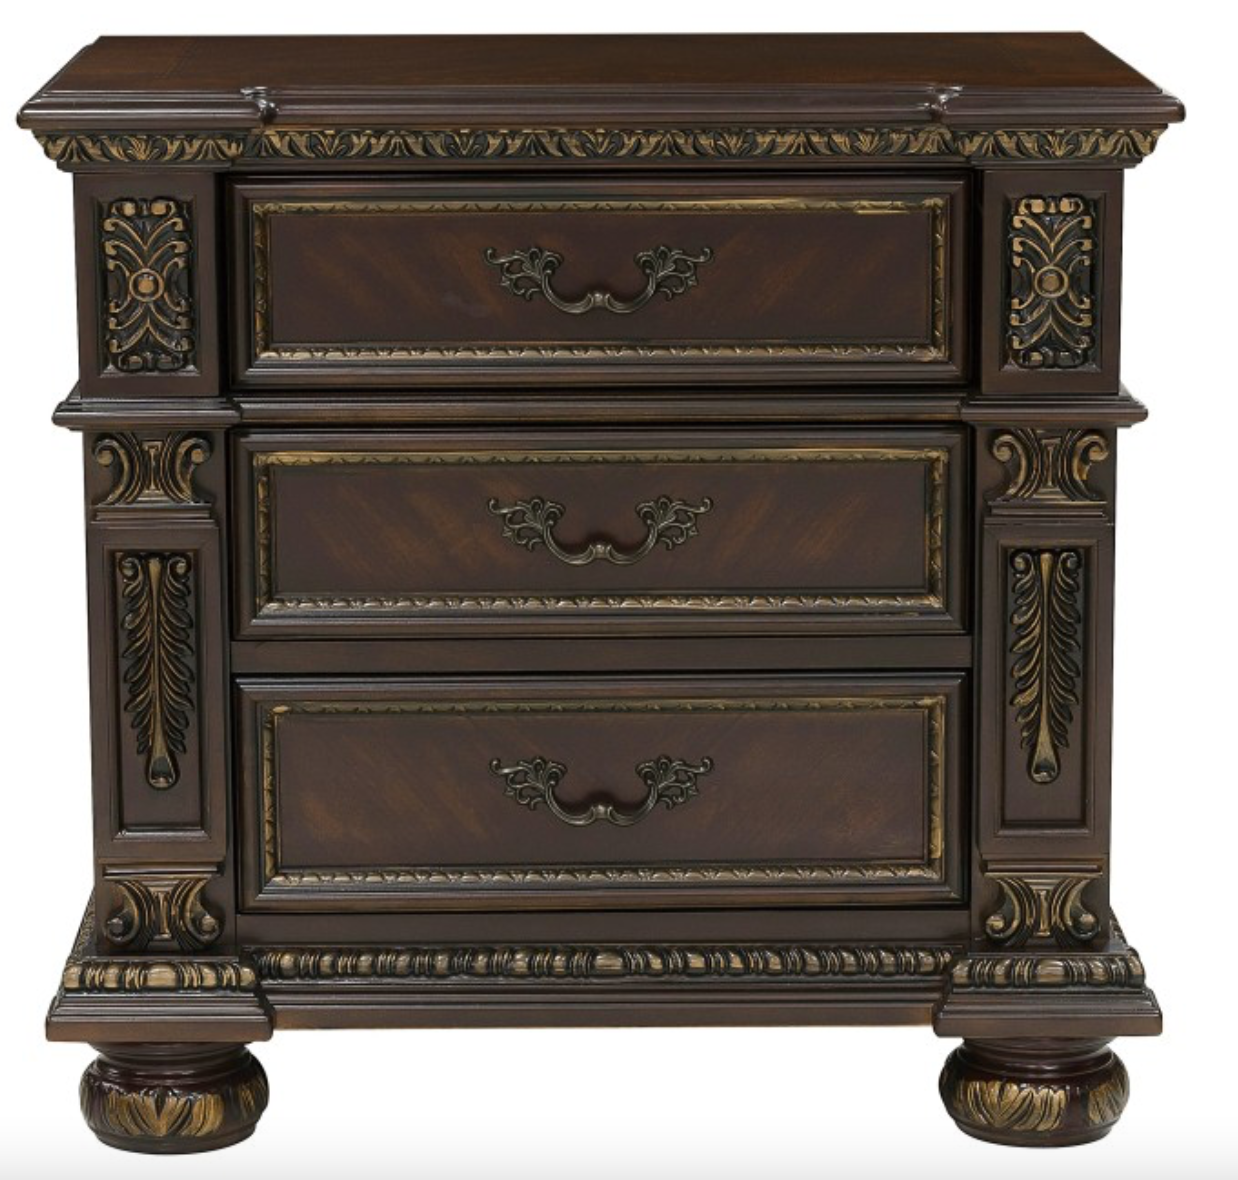 Catalonia Collection Old-World European Cherry Nightstand